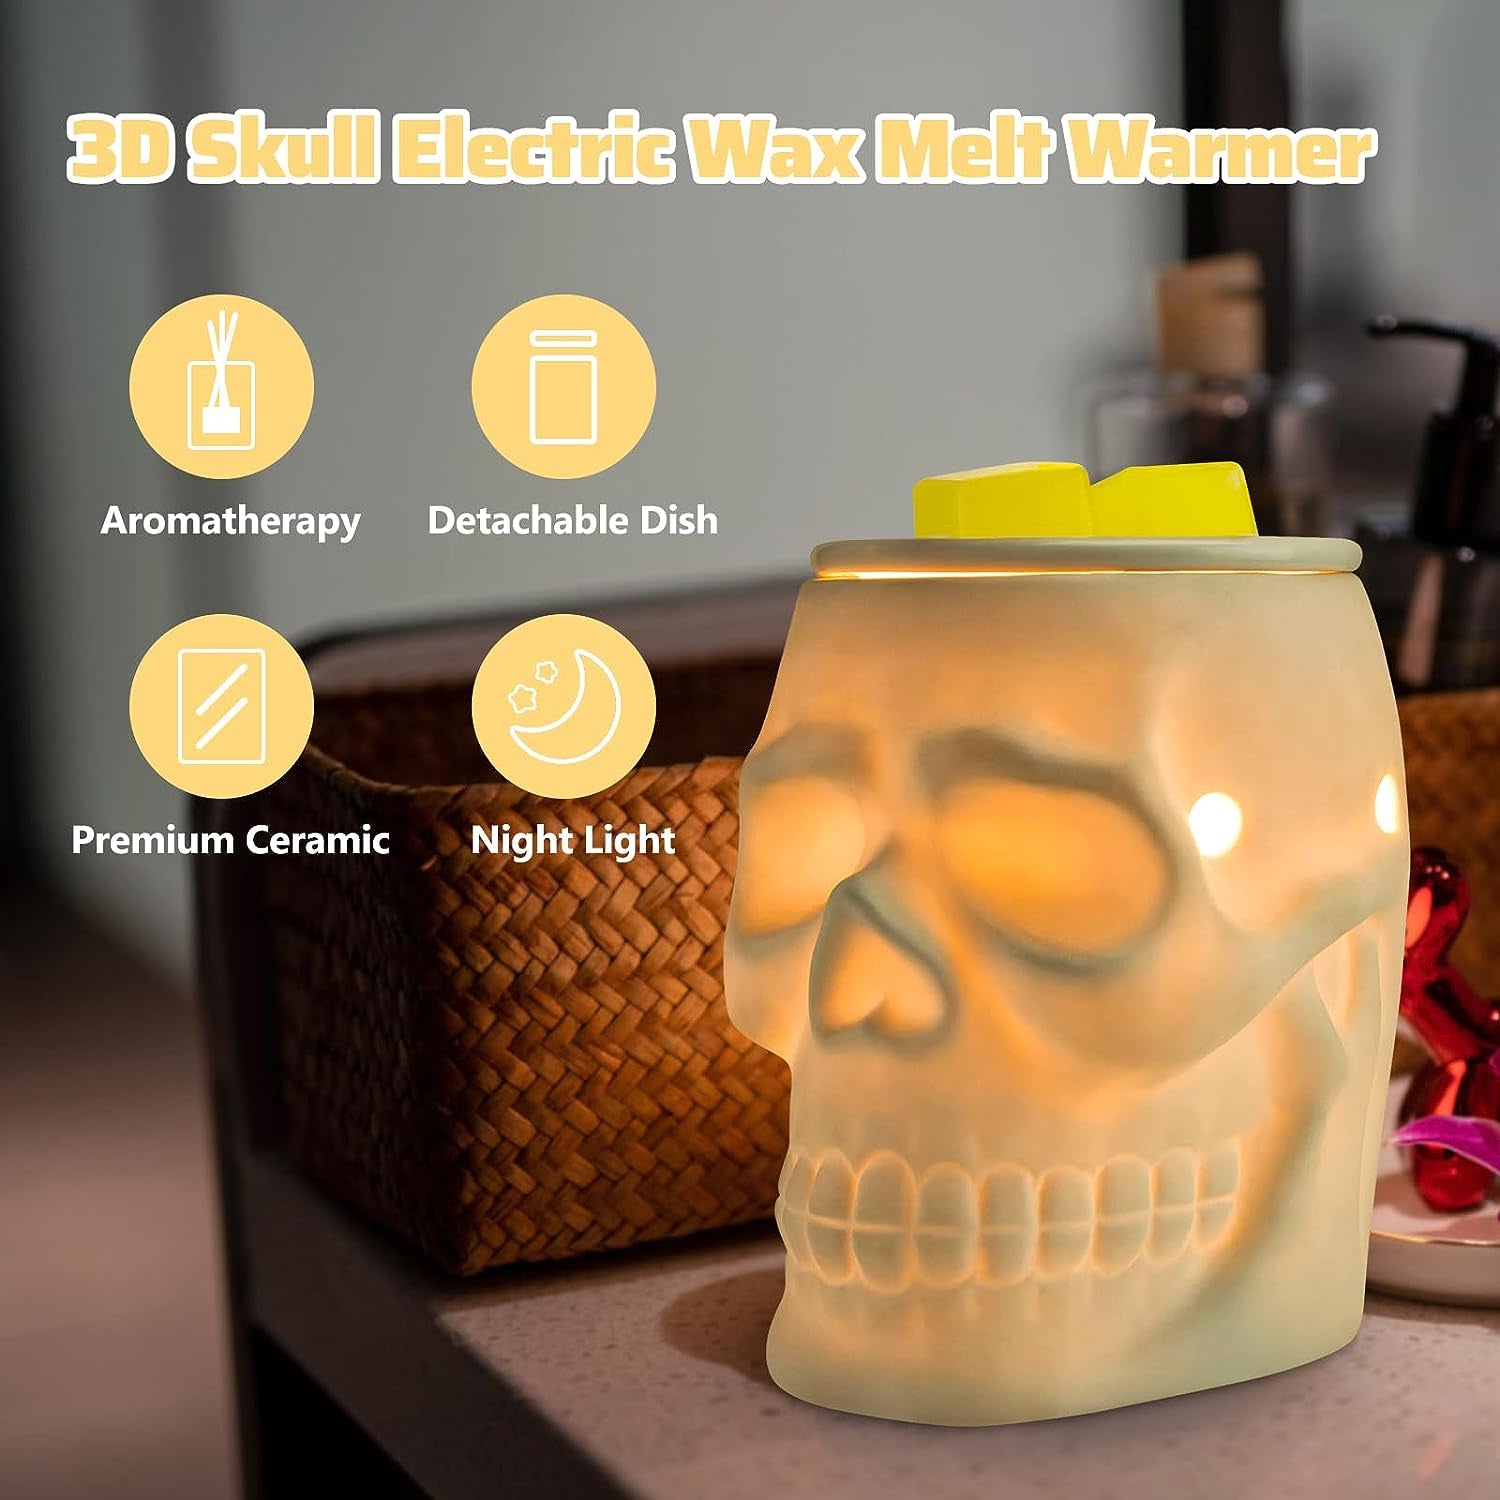 Resurgent Skull Ceramic Electric Wax Melt Warmer - Home Fragrance Oil Diffuser for Home Decor, Office, and Living Room, Ideal Gifts, Includes Two Bulbs